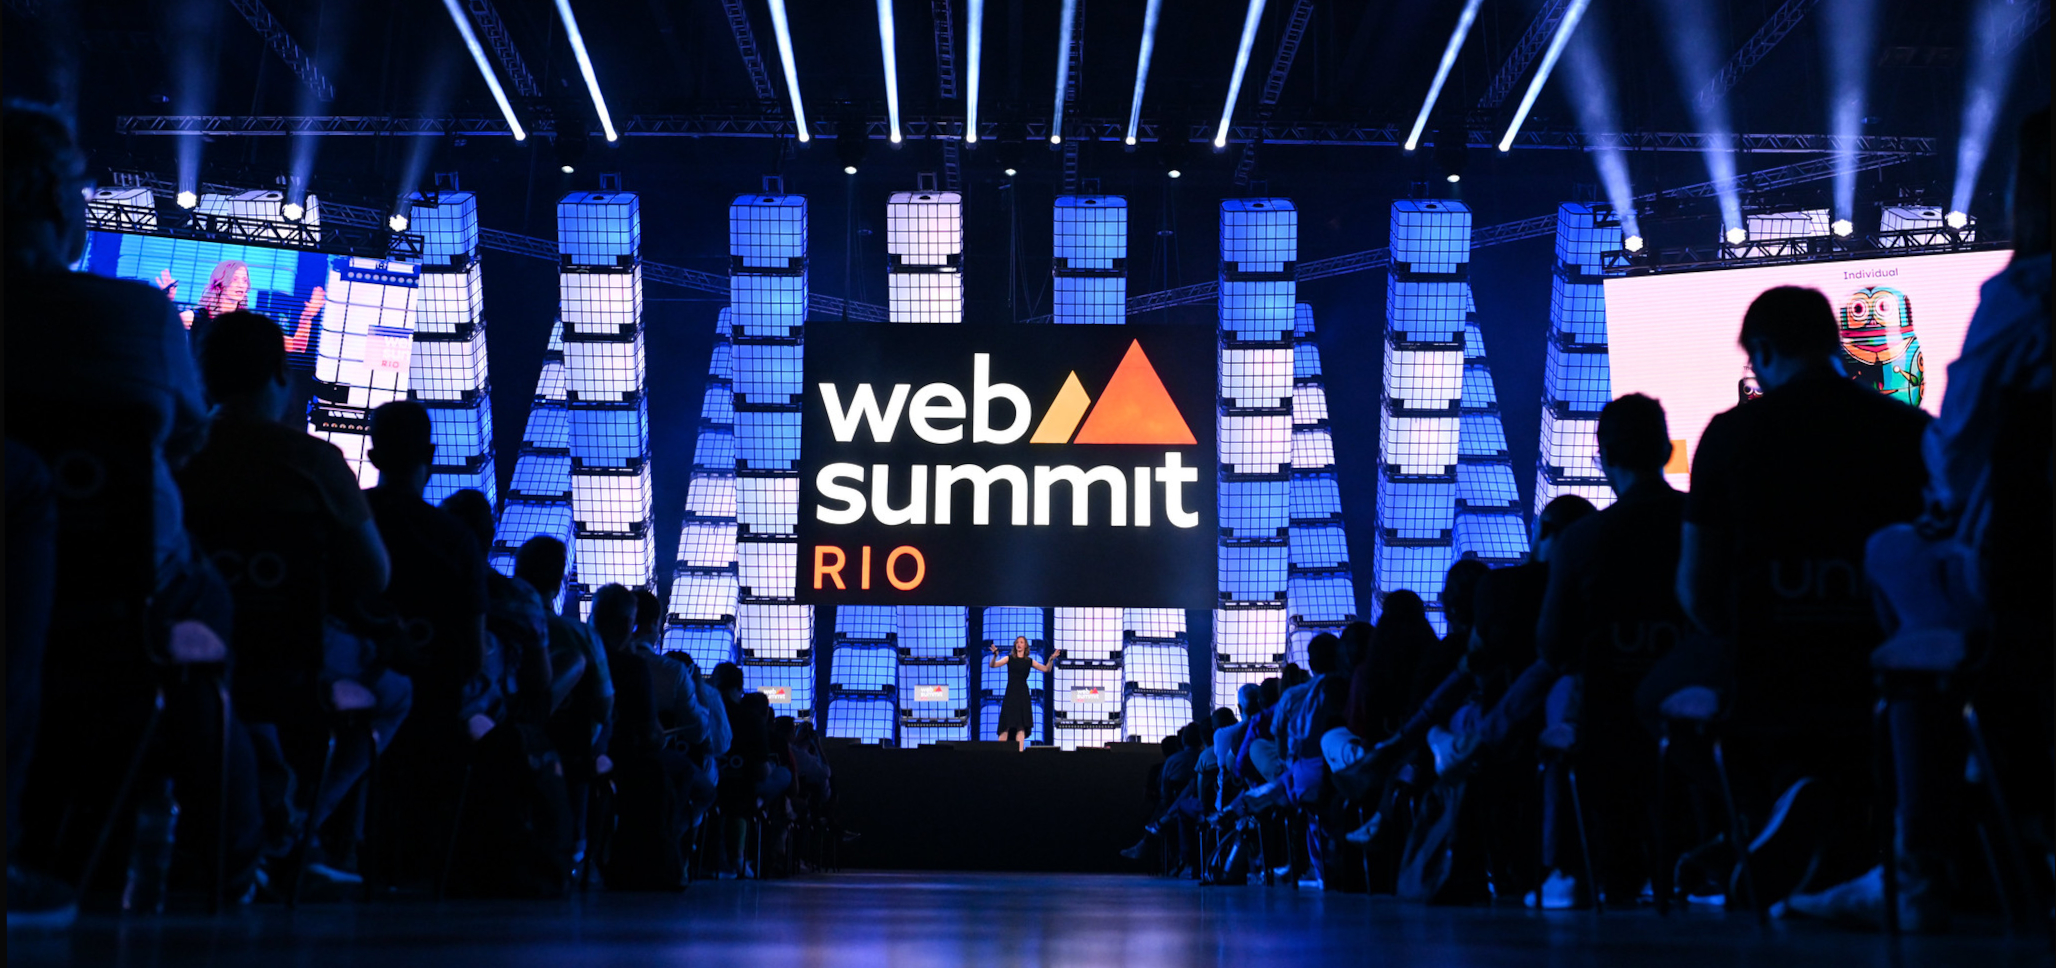 A person stands on a big stage, under a large Web Summit Rio sign. The stage is viewed from an aisle that runs through a crowded audience, which is seated.